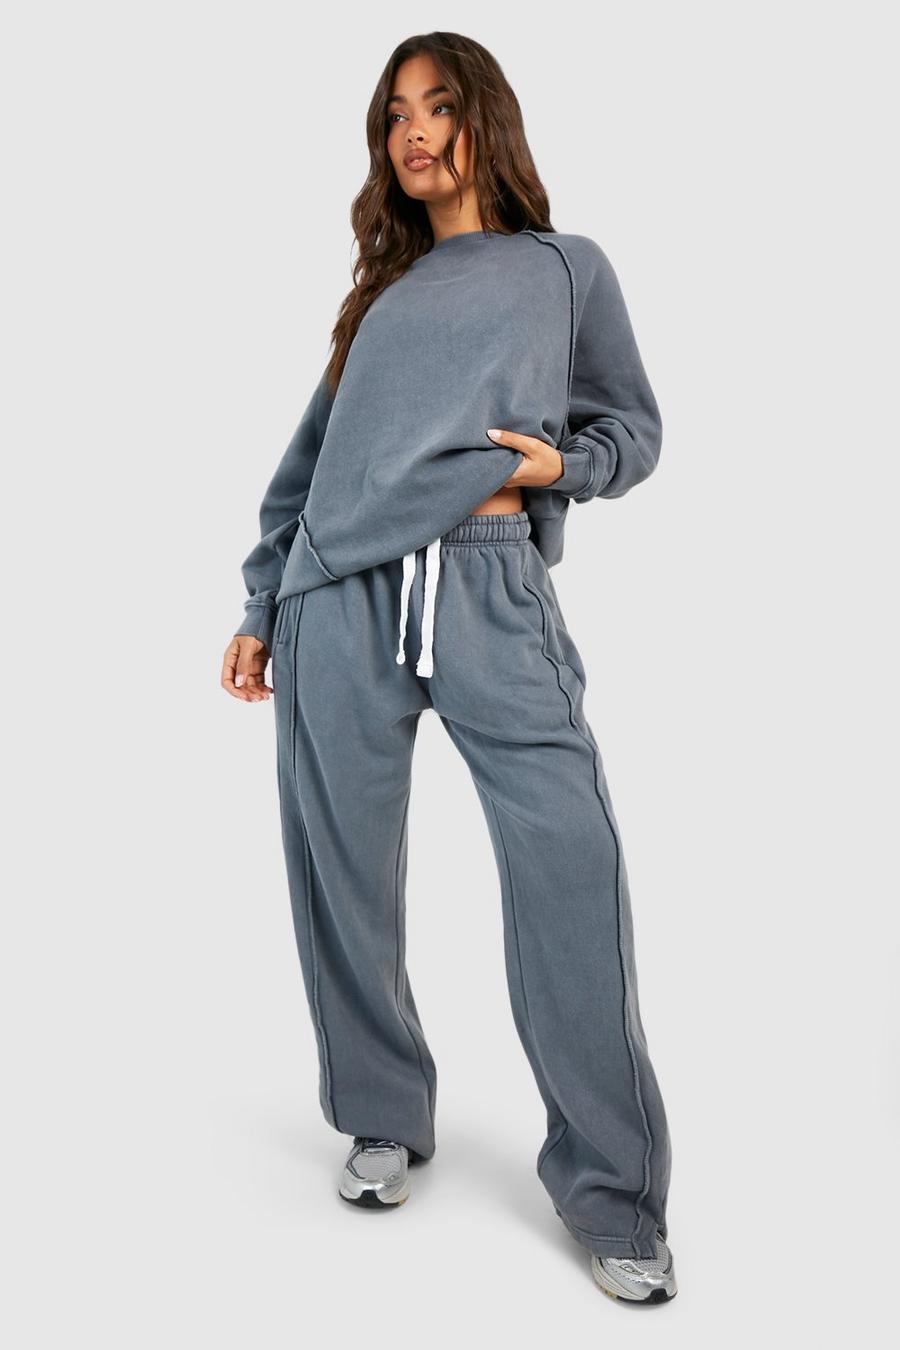 Winter Collections] 2020 New Arival Tracksuit Women Casual Ladies Long  Sleeve O-Neck Striped 2 Piece Set + Pants Set Female Slim Tracksuits -  Order Now !